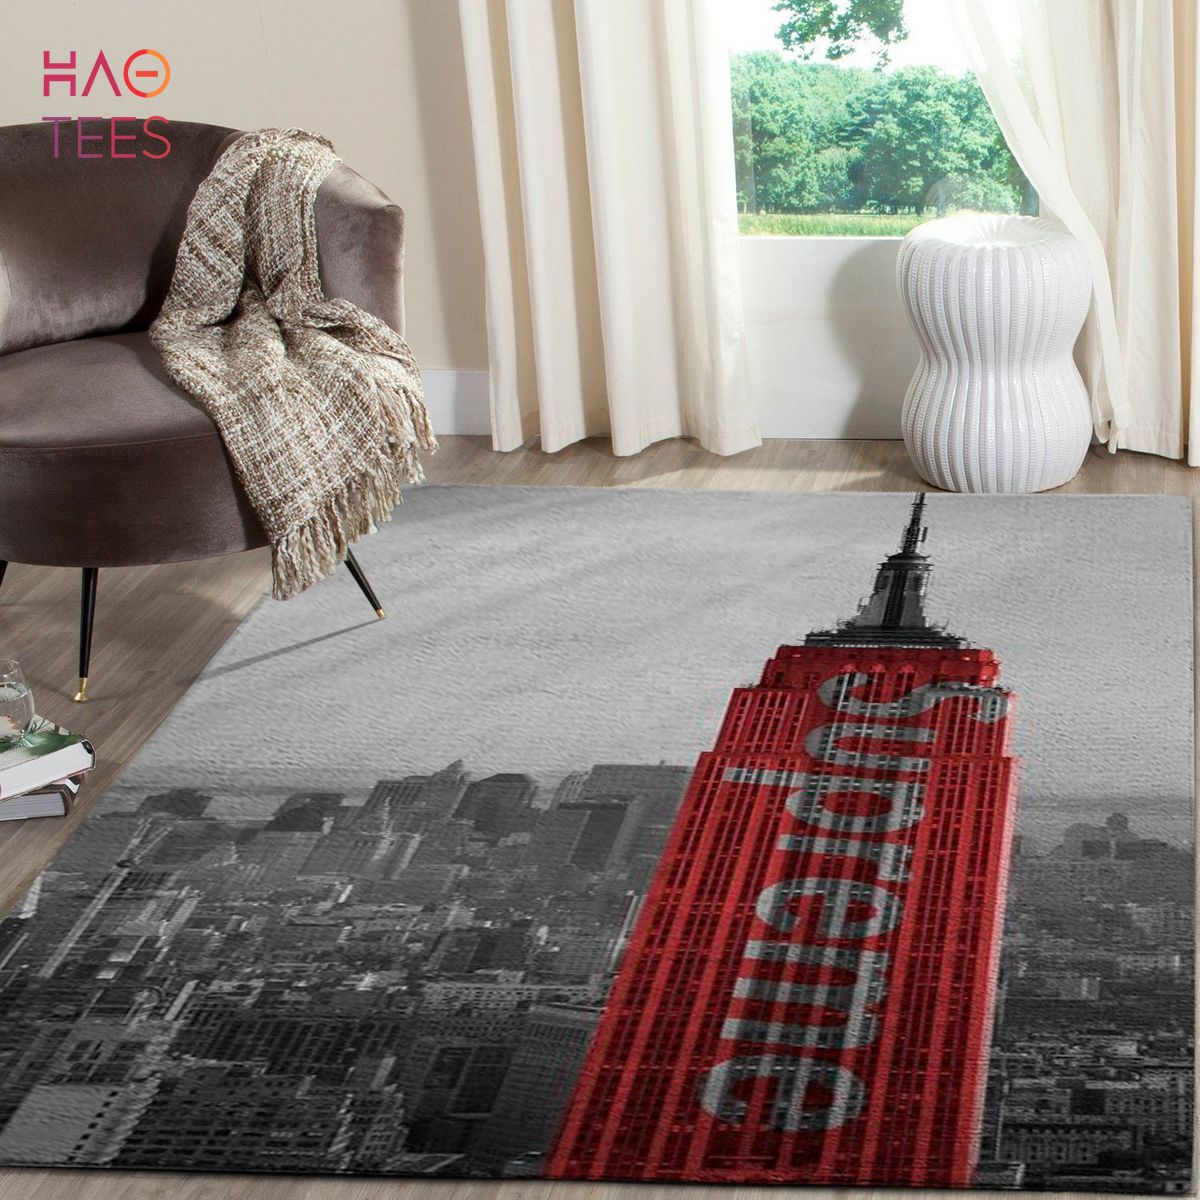 The Red Supreme Rug